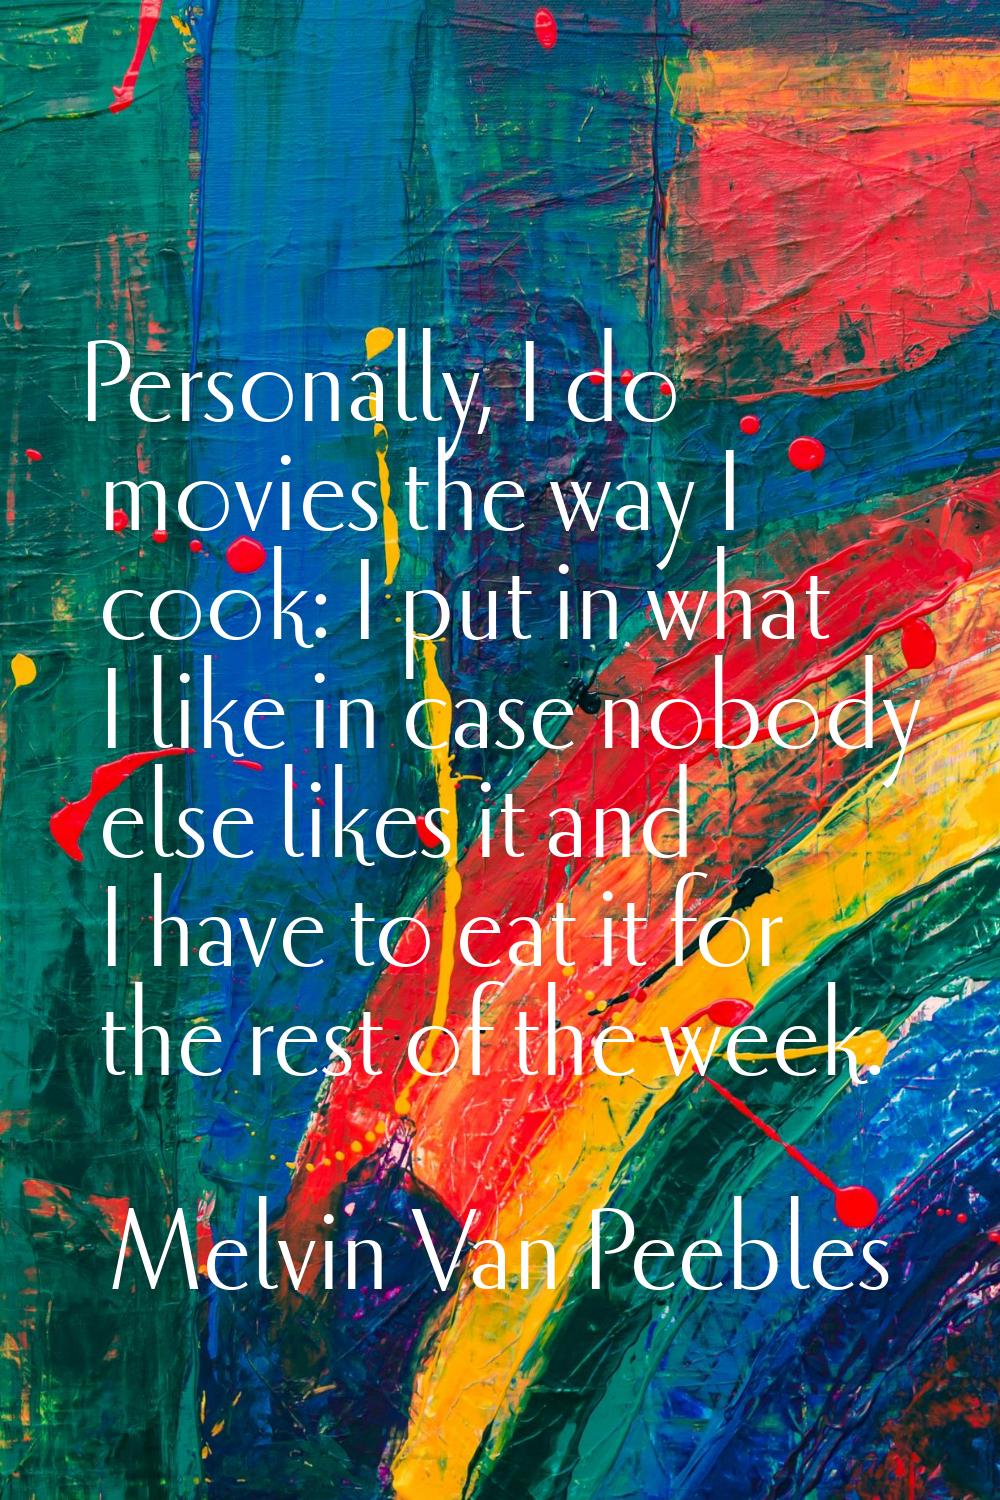 Personally, I do movies the way I cook: I put in what I like in case nobody else likes it and I hav